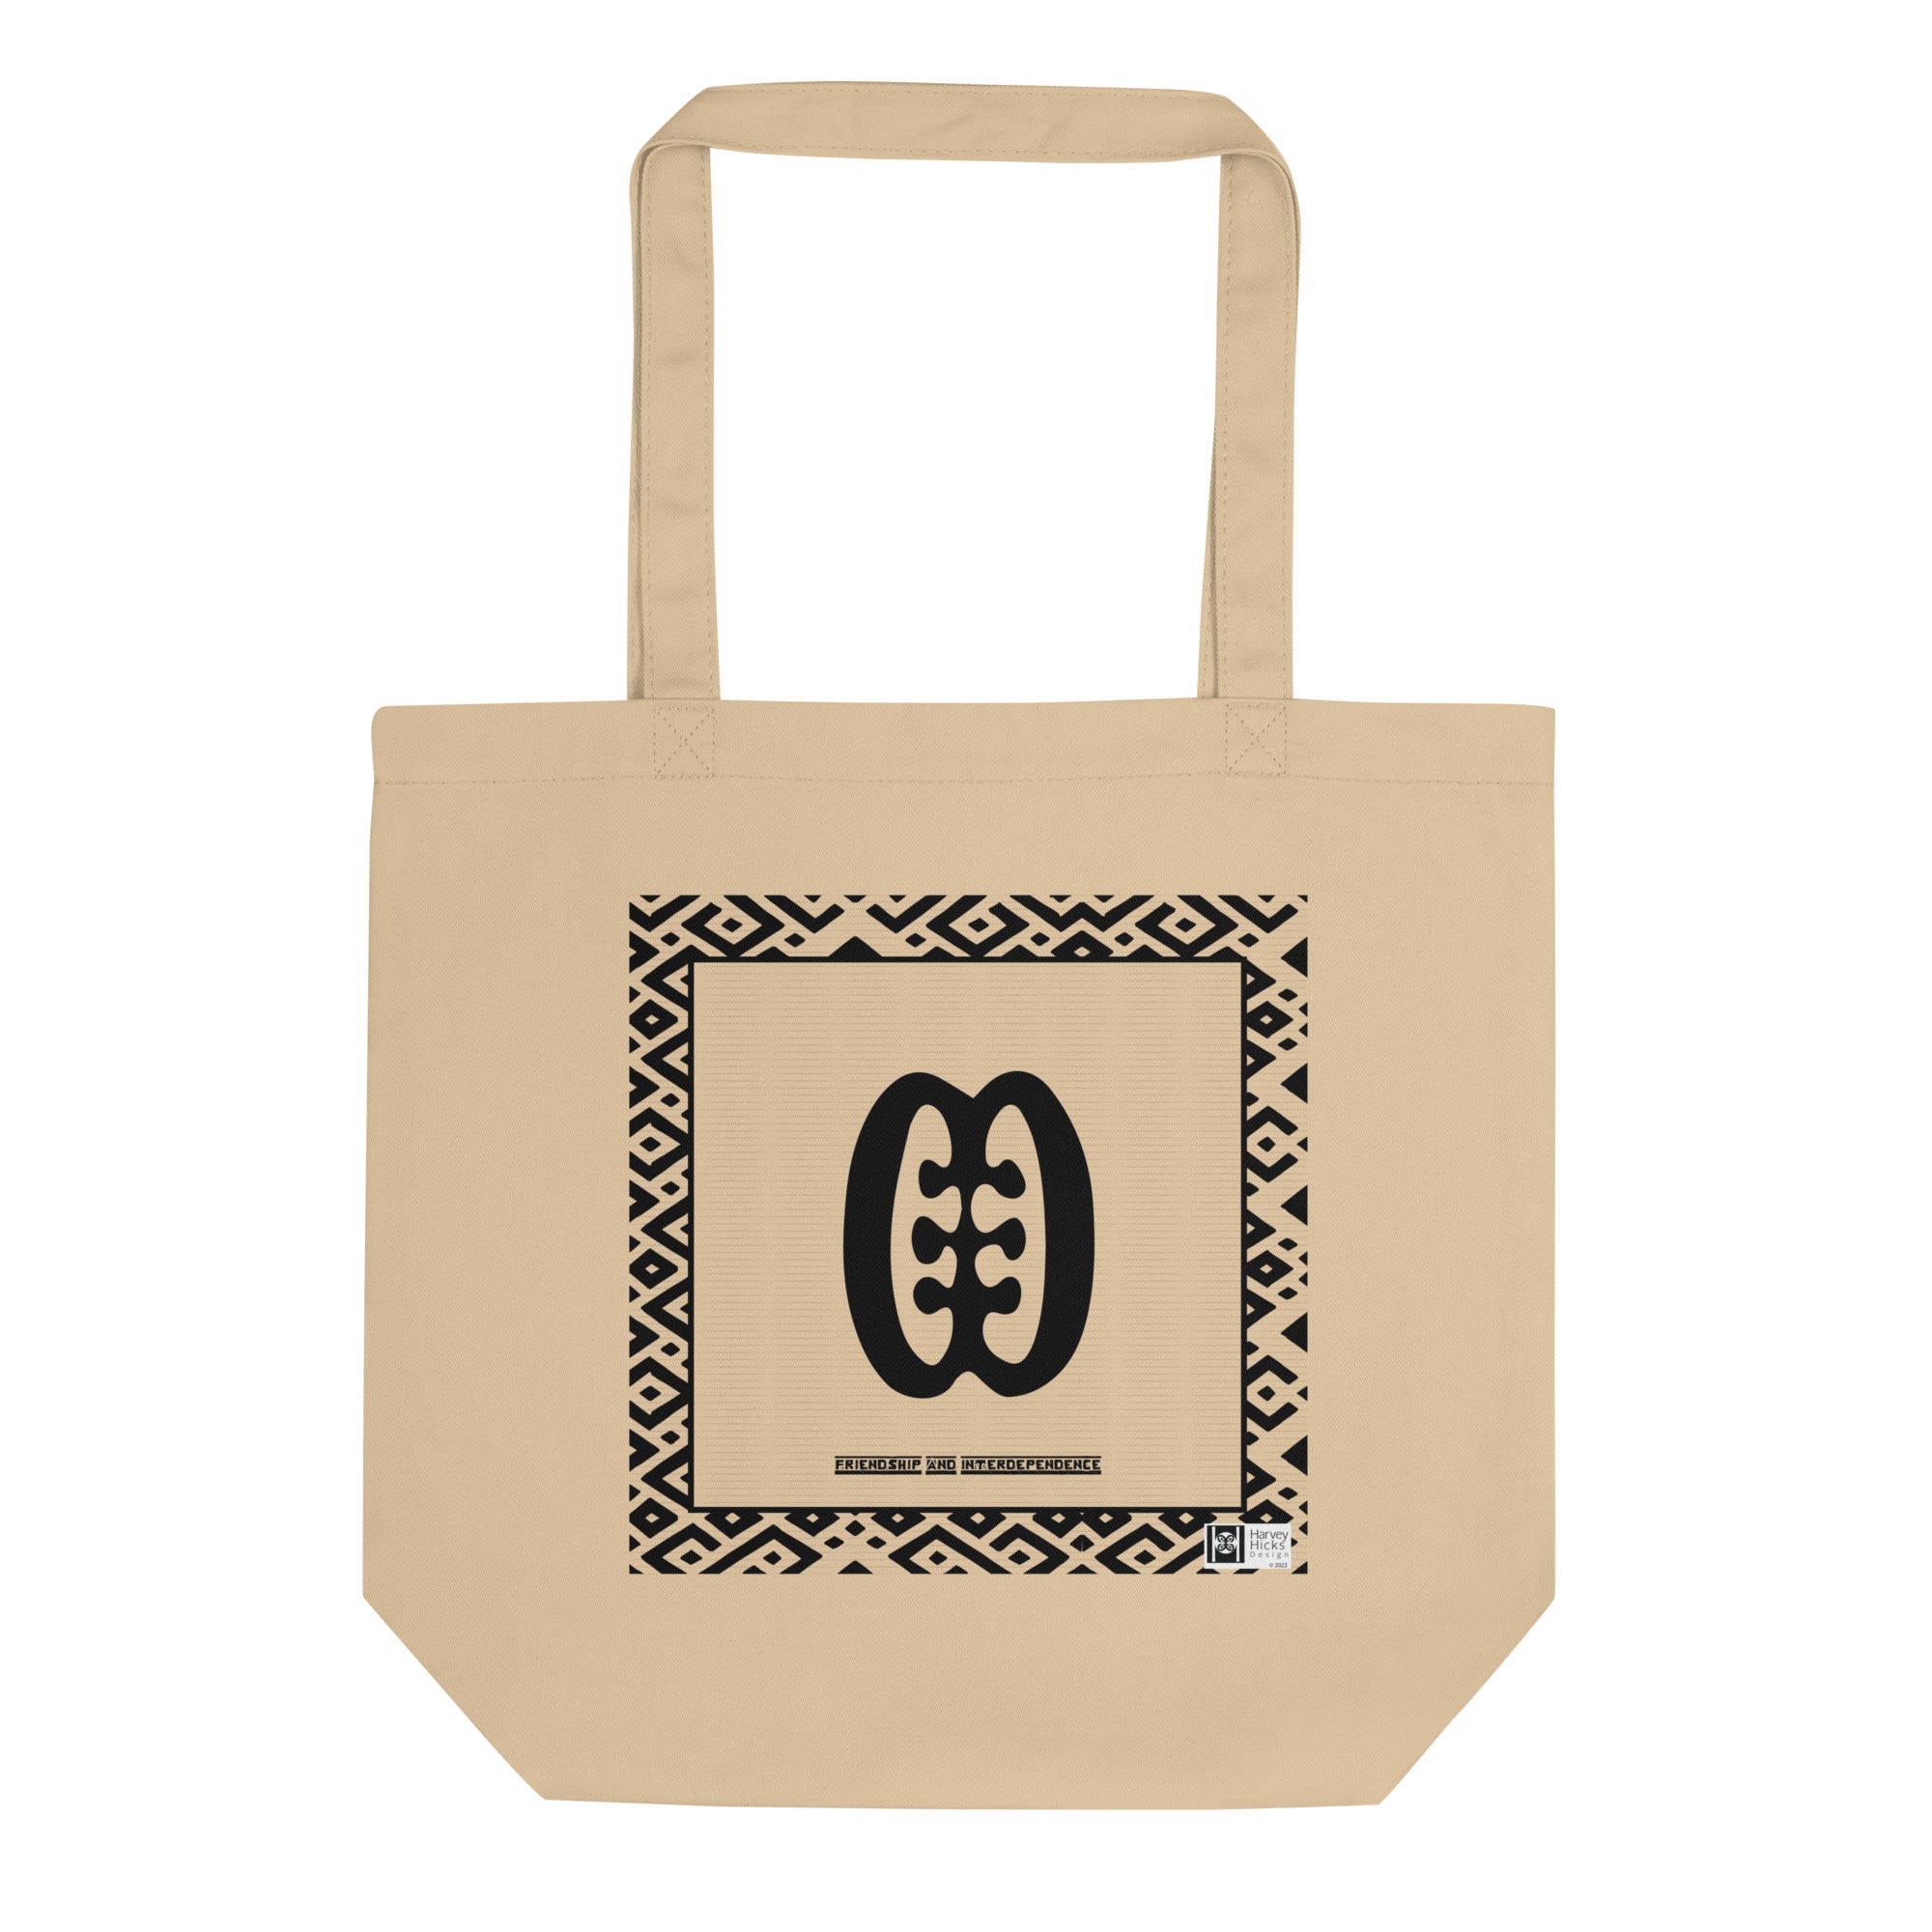 100% cotton Eco Tote Bag, featuring the Adinkra symbol for friendship